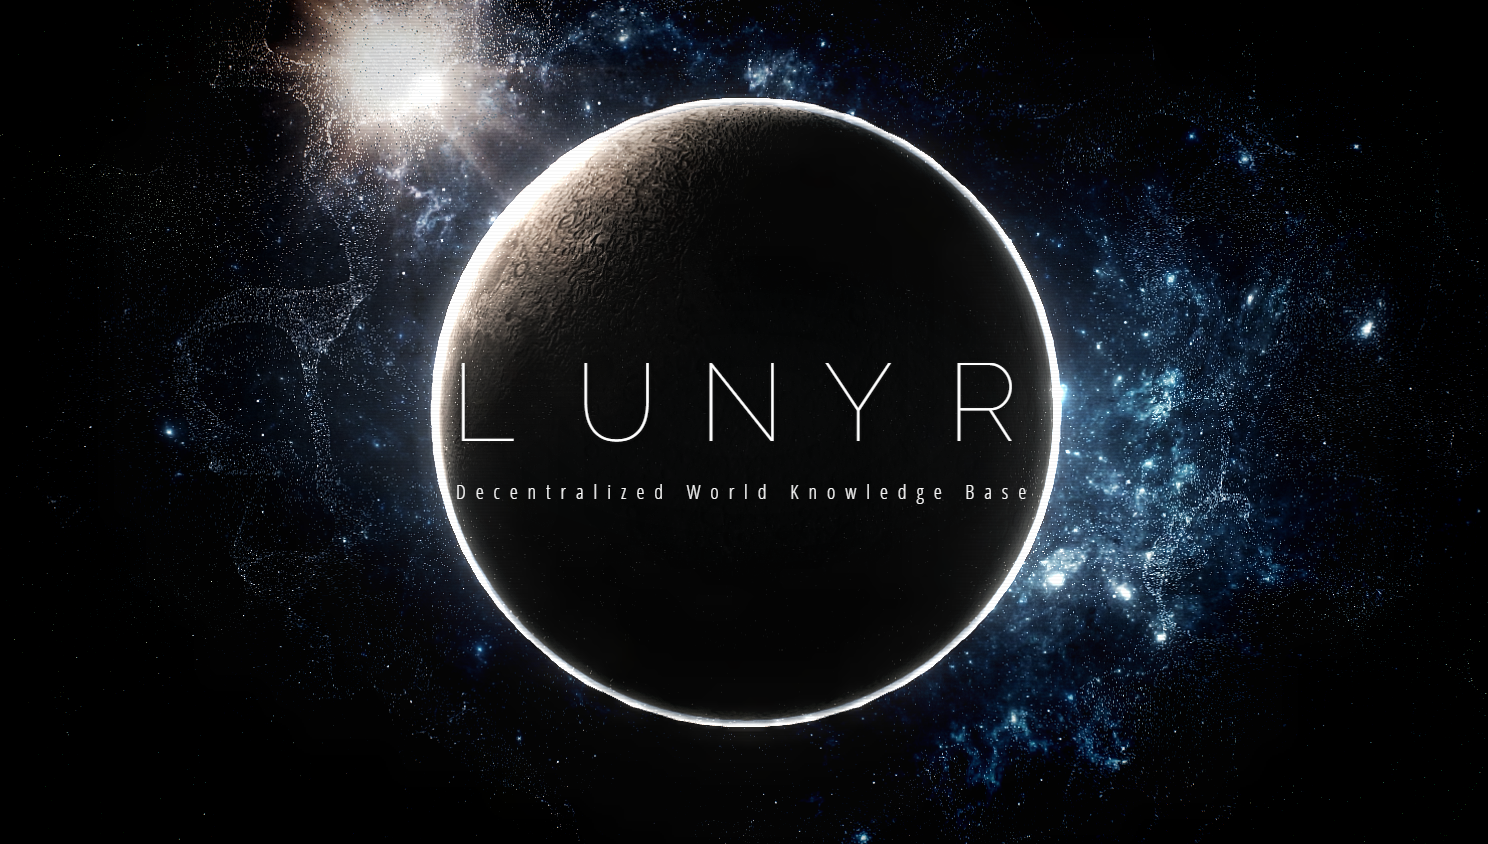 Lunyr Partners with Airbitz to Increase Adoption of the Lunyr Platform